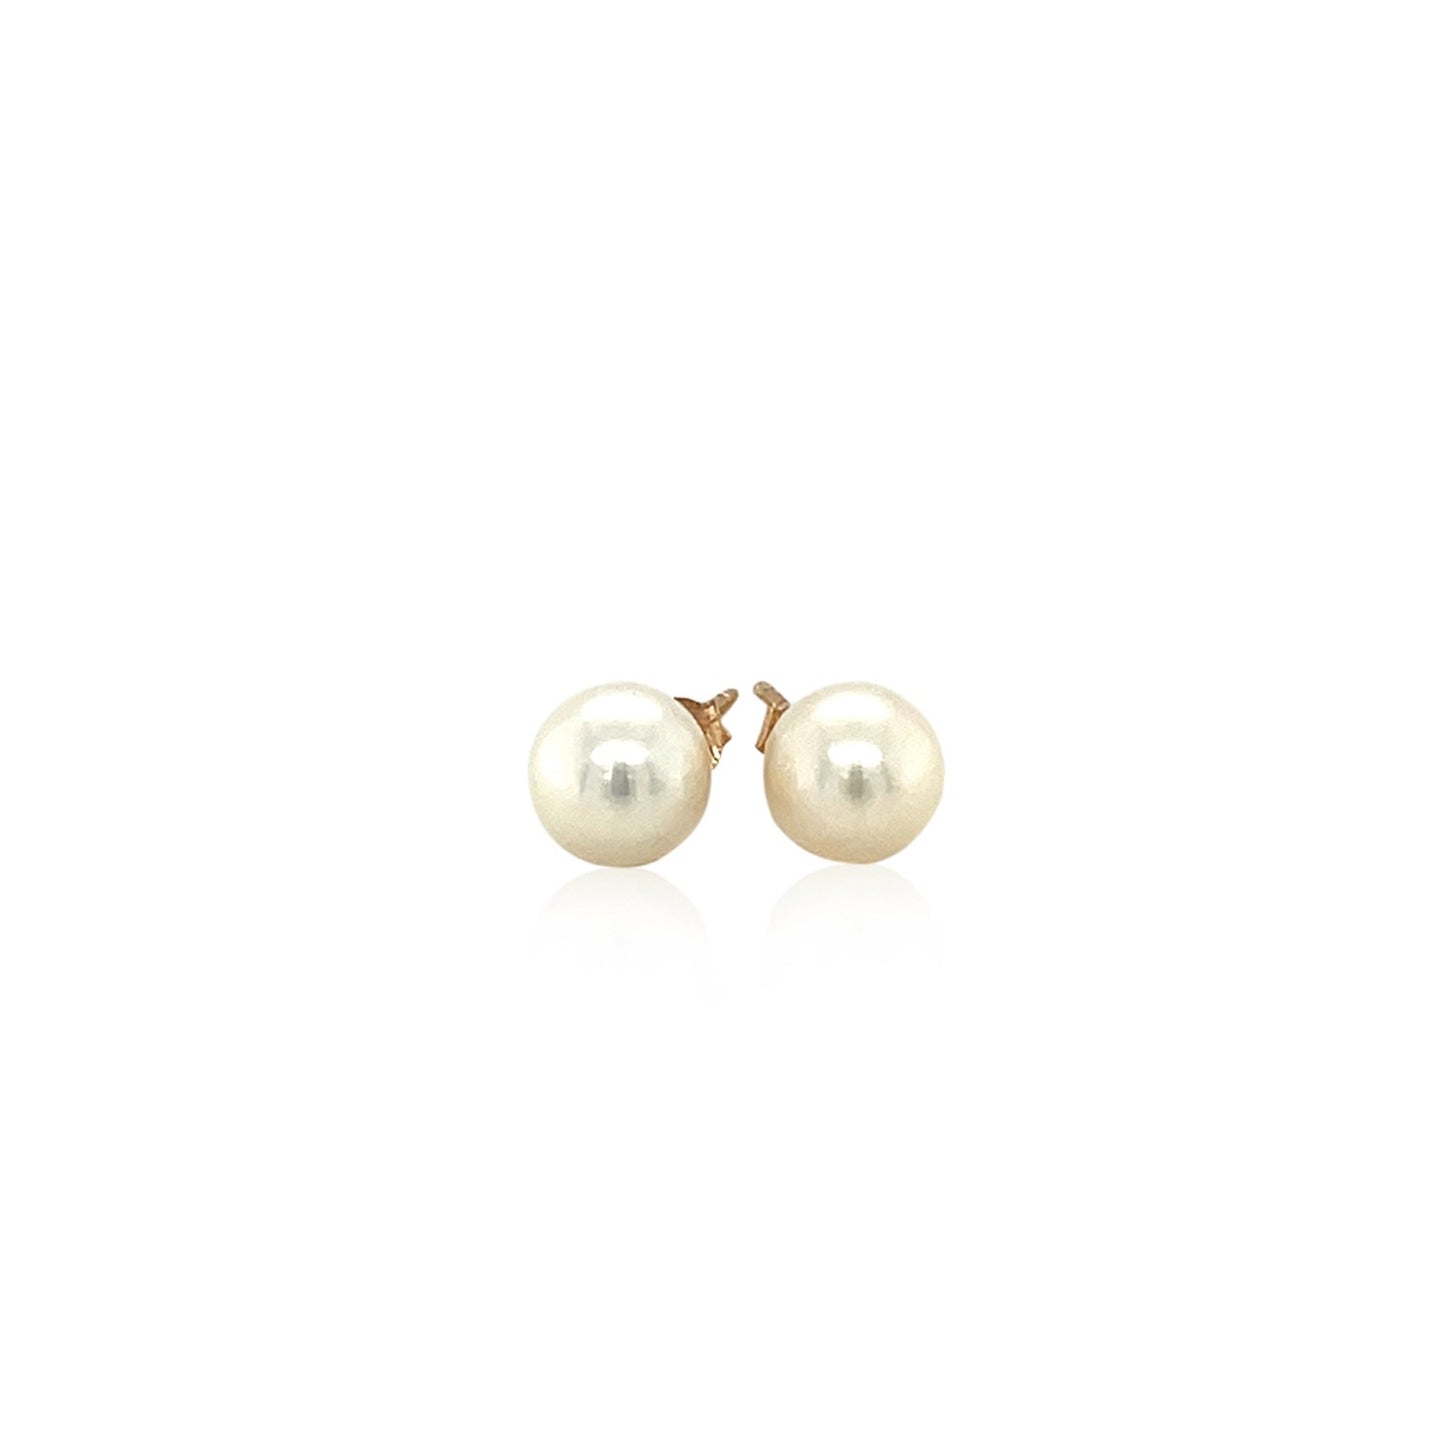 14k Yellow Gold Freshwater Cultured White Pearl Stud Earrings (6mm)